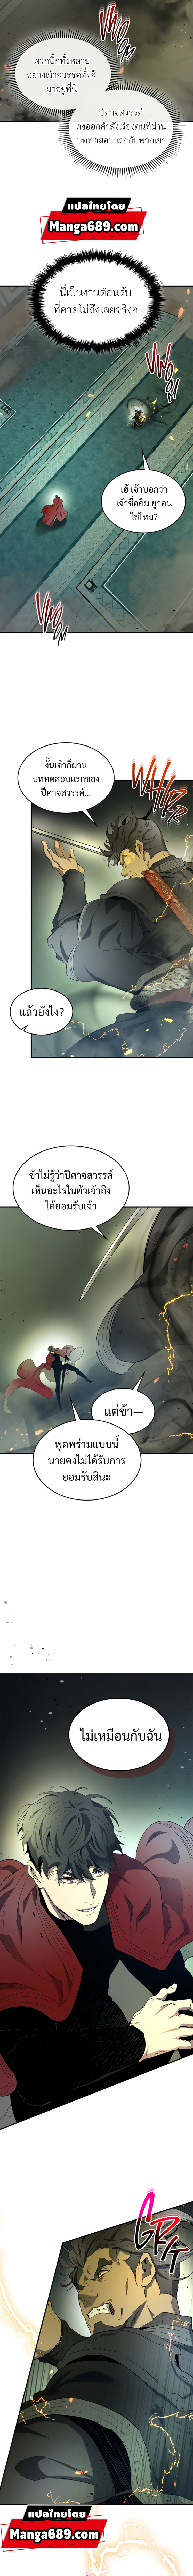 Leveling With The Gods38 (2)